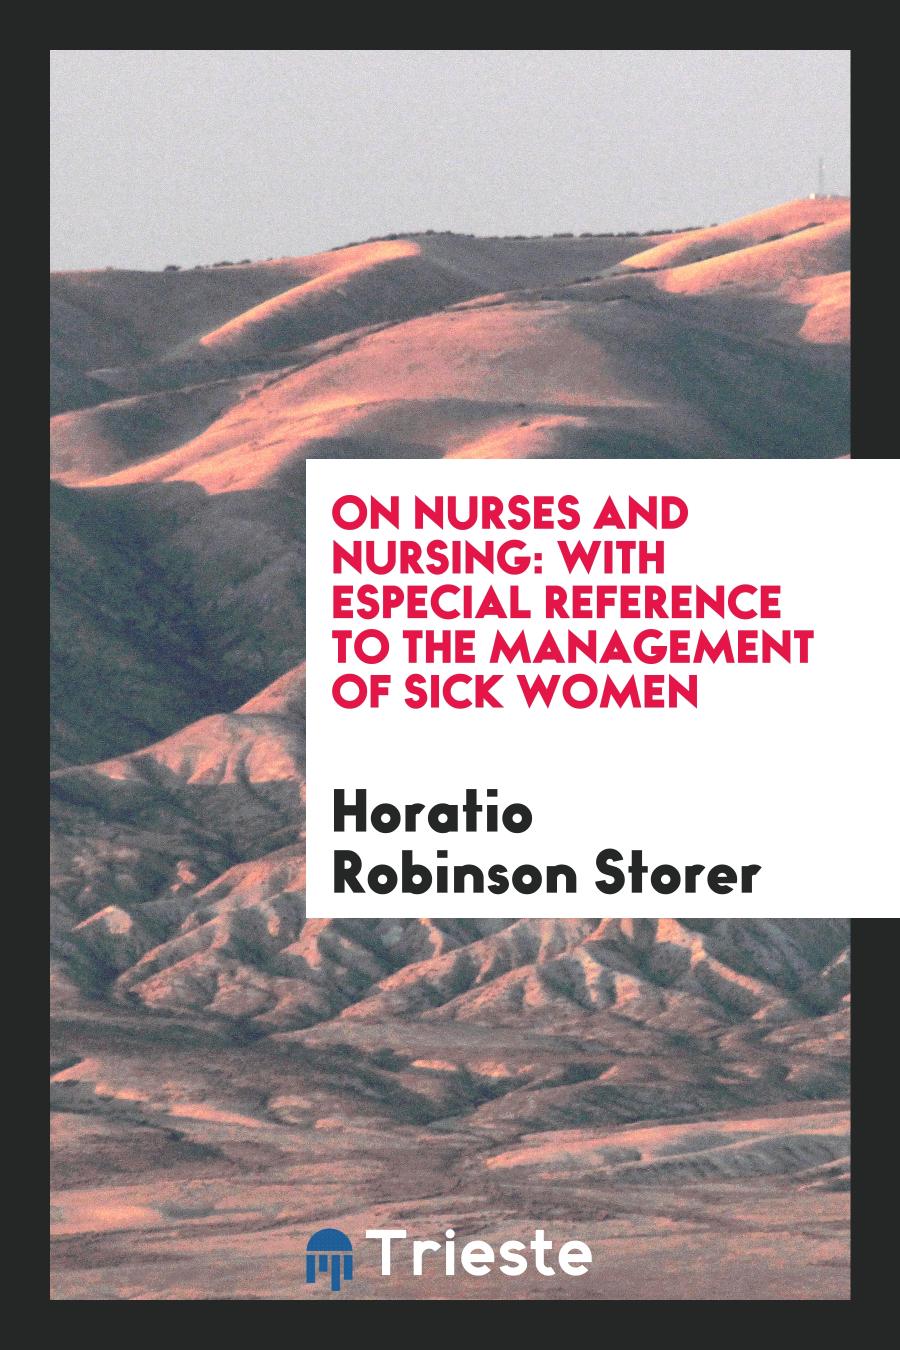 On Nurses and Nursing: With Especial Reference to the Management of Sick Women